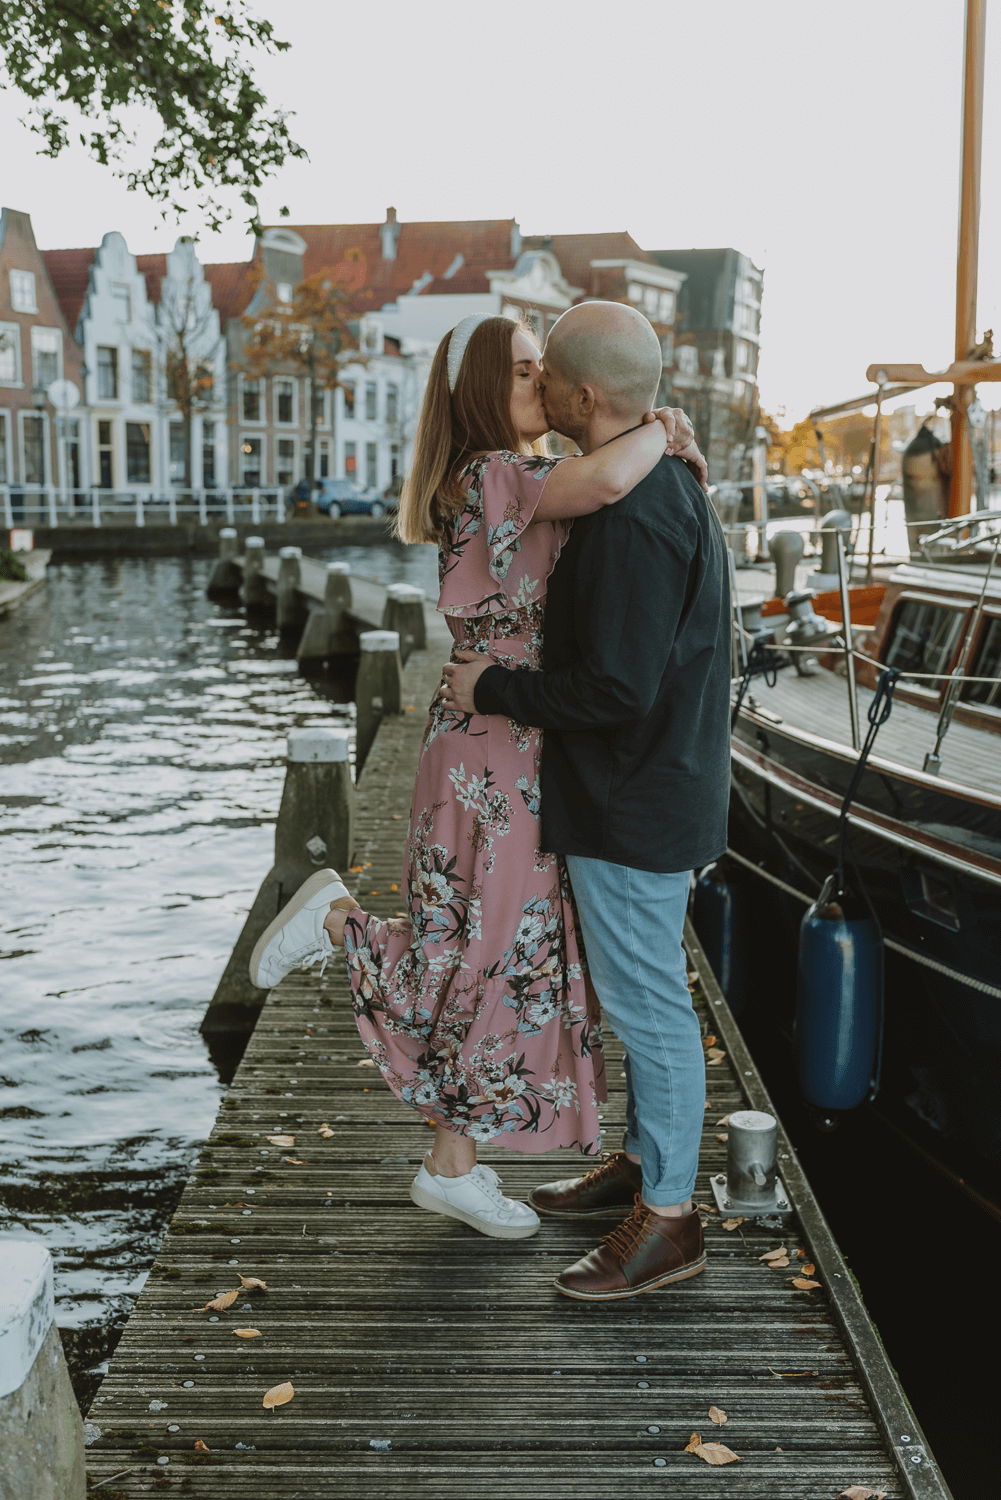 Vicky McLachlan Photography | Couples Photographer in Haarlem/Amsterdam_6